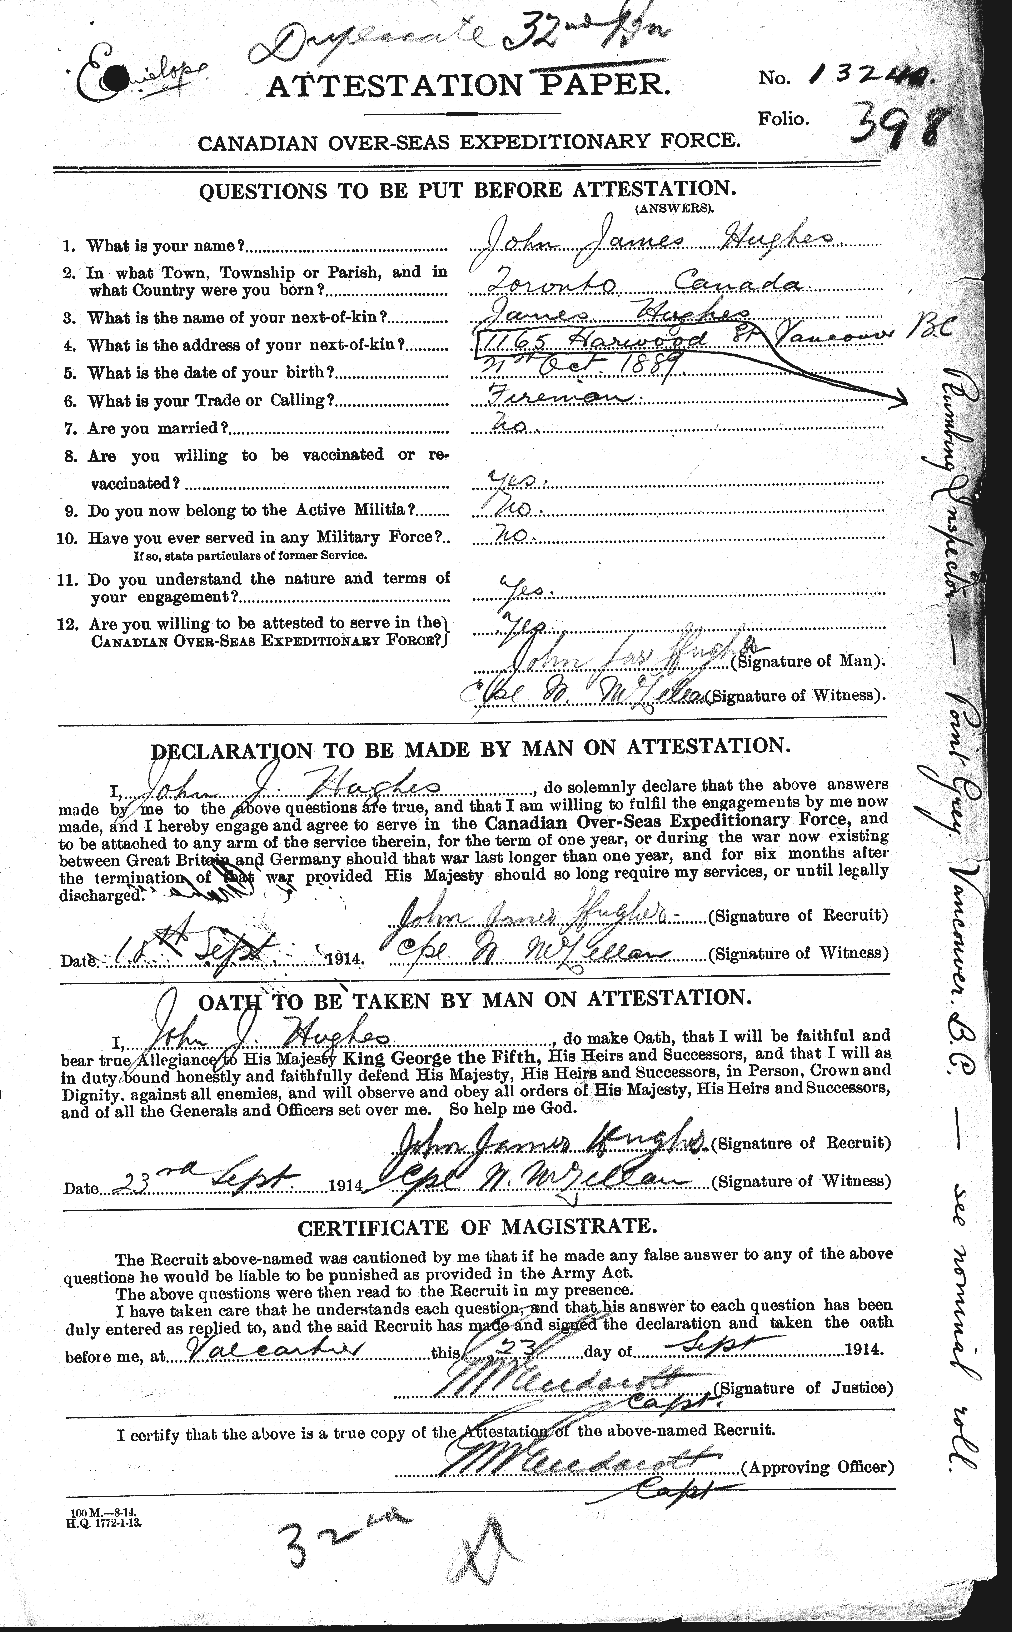 Personnel Records of the First World War - CEF 404031a